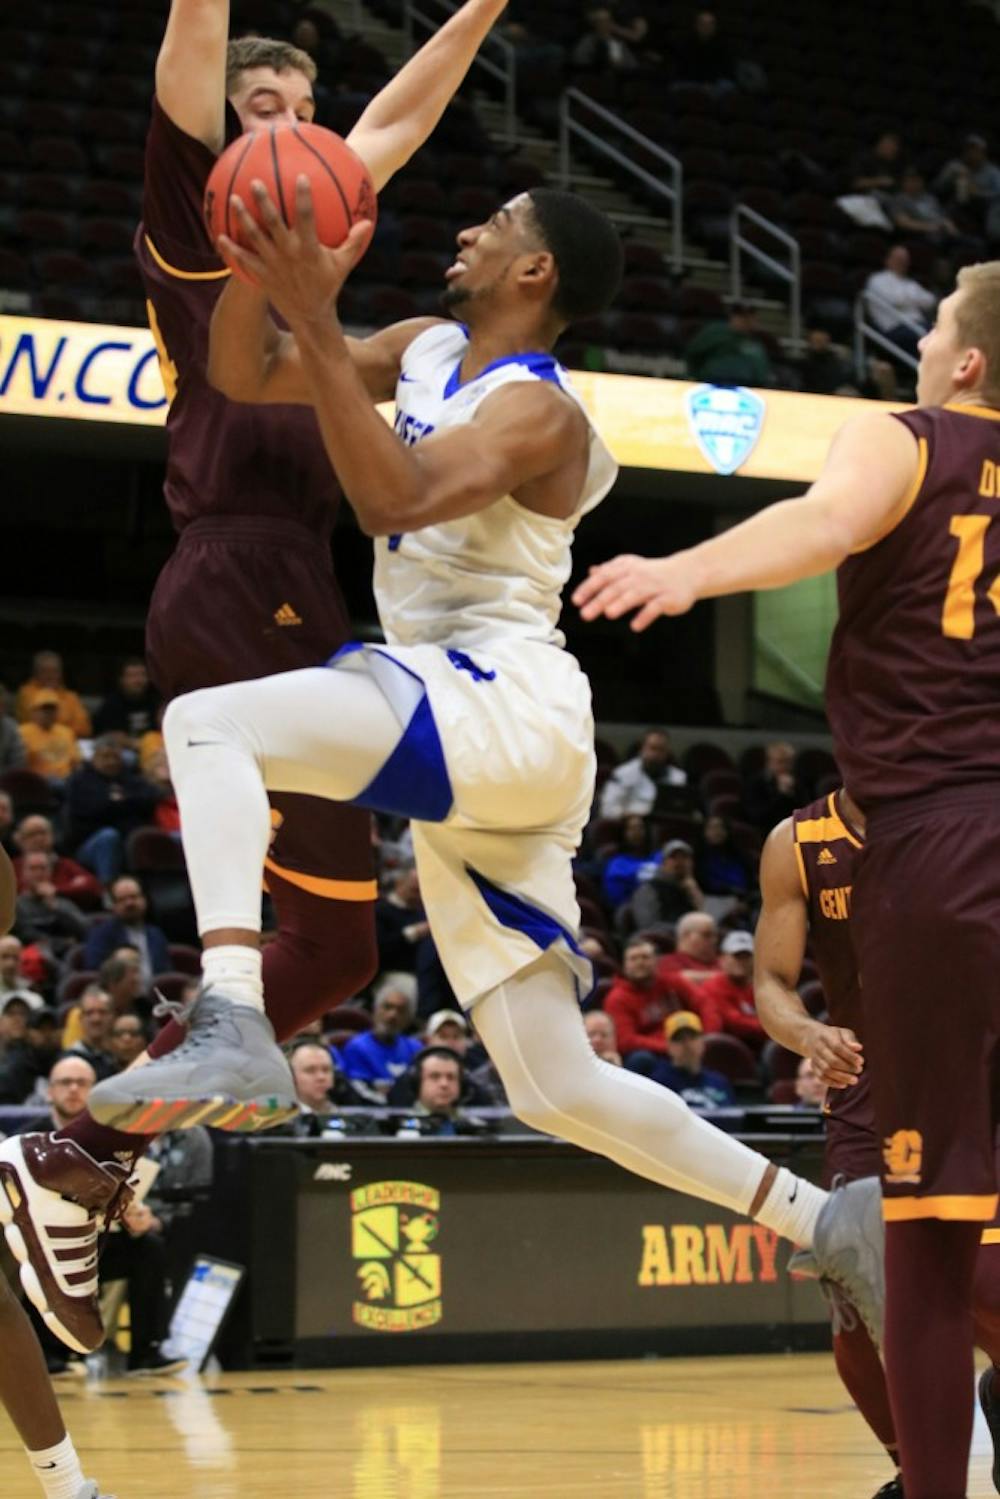 <p>Junior guard CJ Massinburg fights through contact for the basket. He  finished with 18 points, 5 rebounds and 4 assists to help the  Bulls advance to the semifinals.</p>